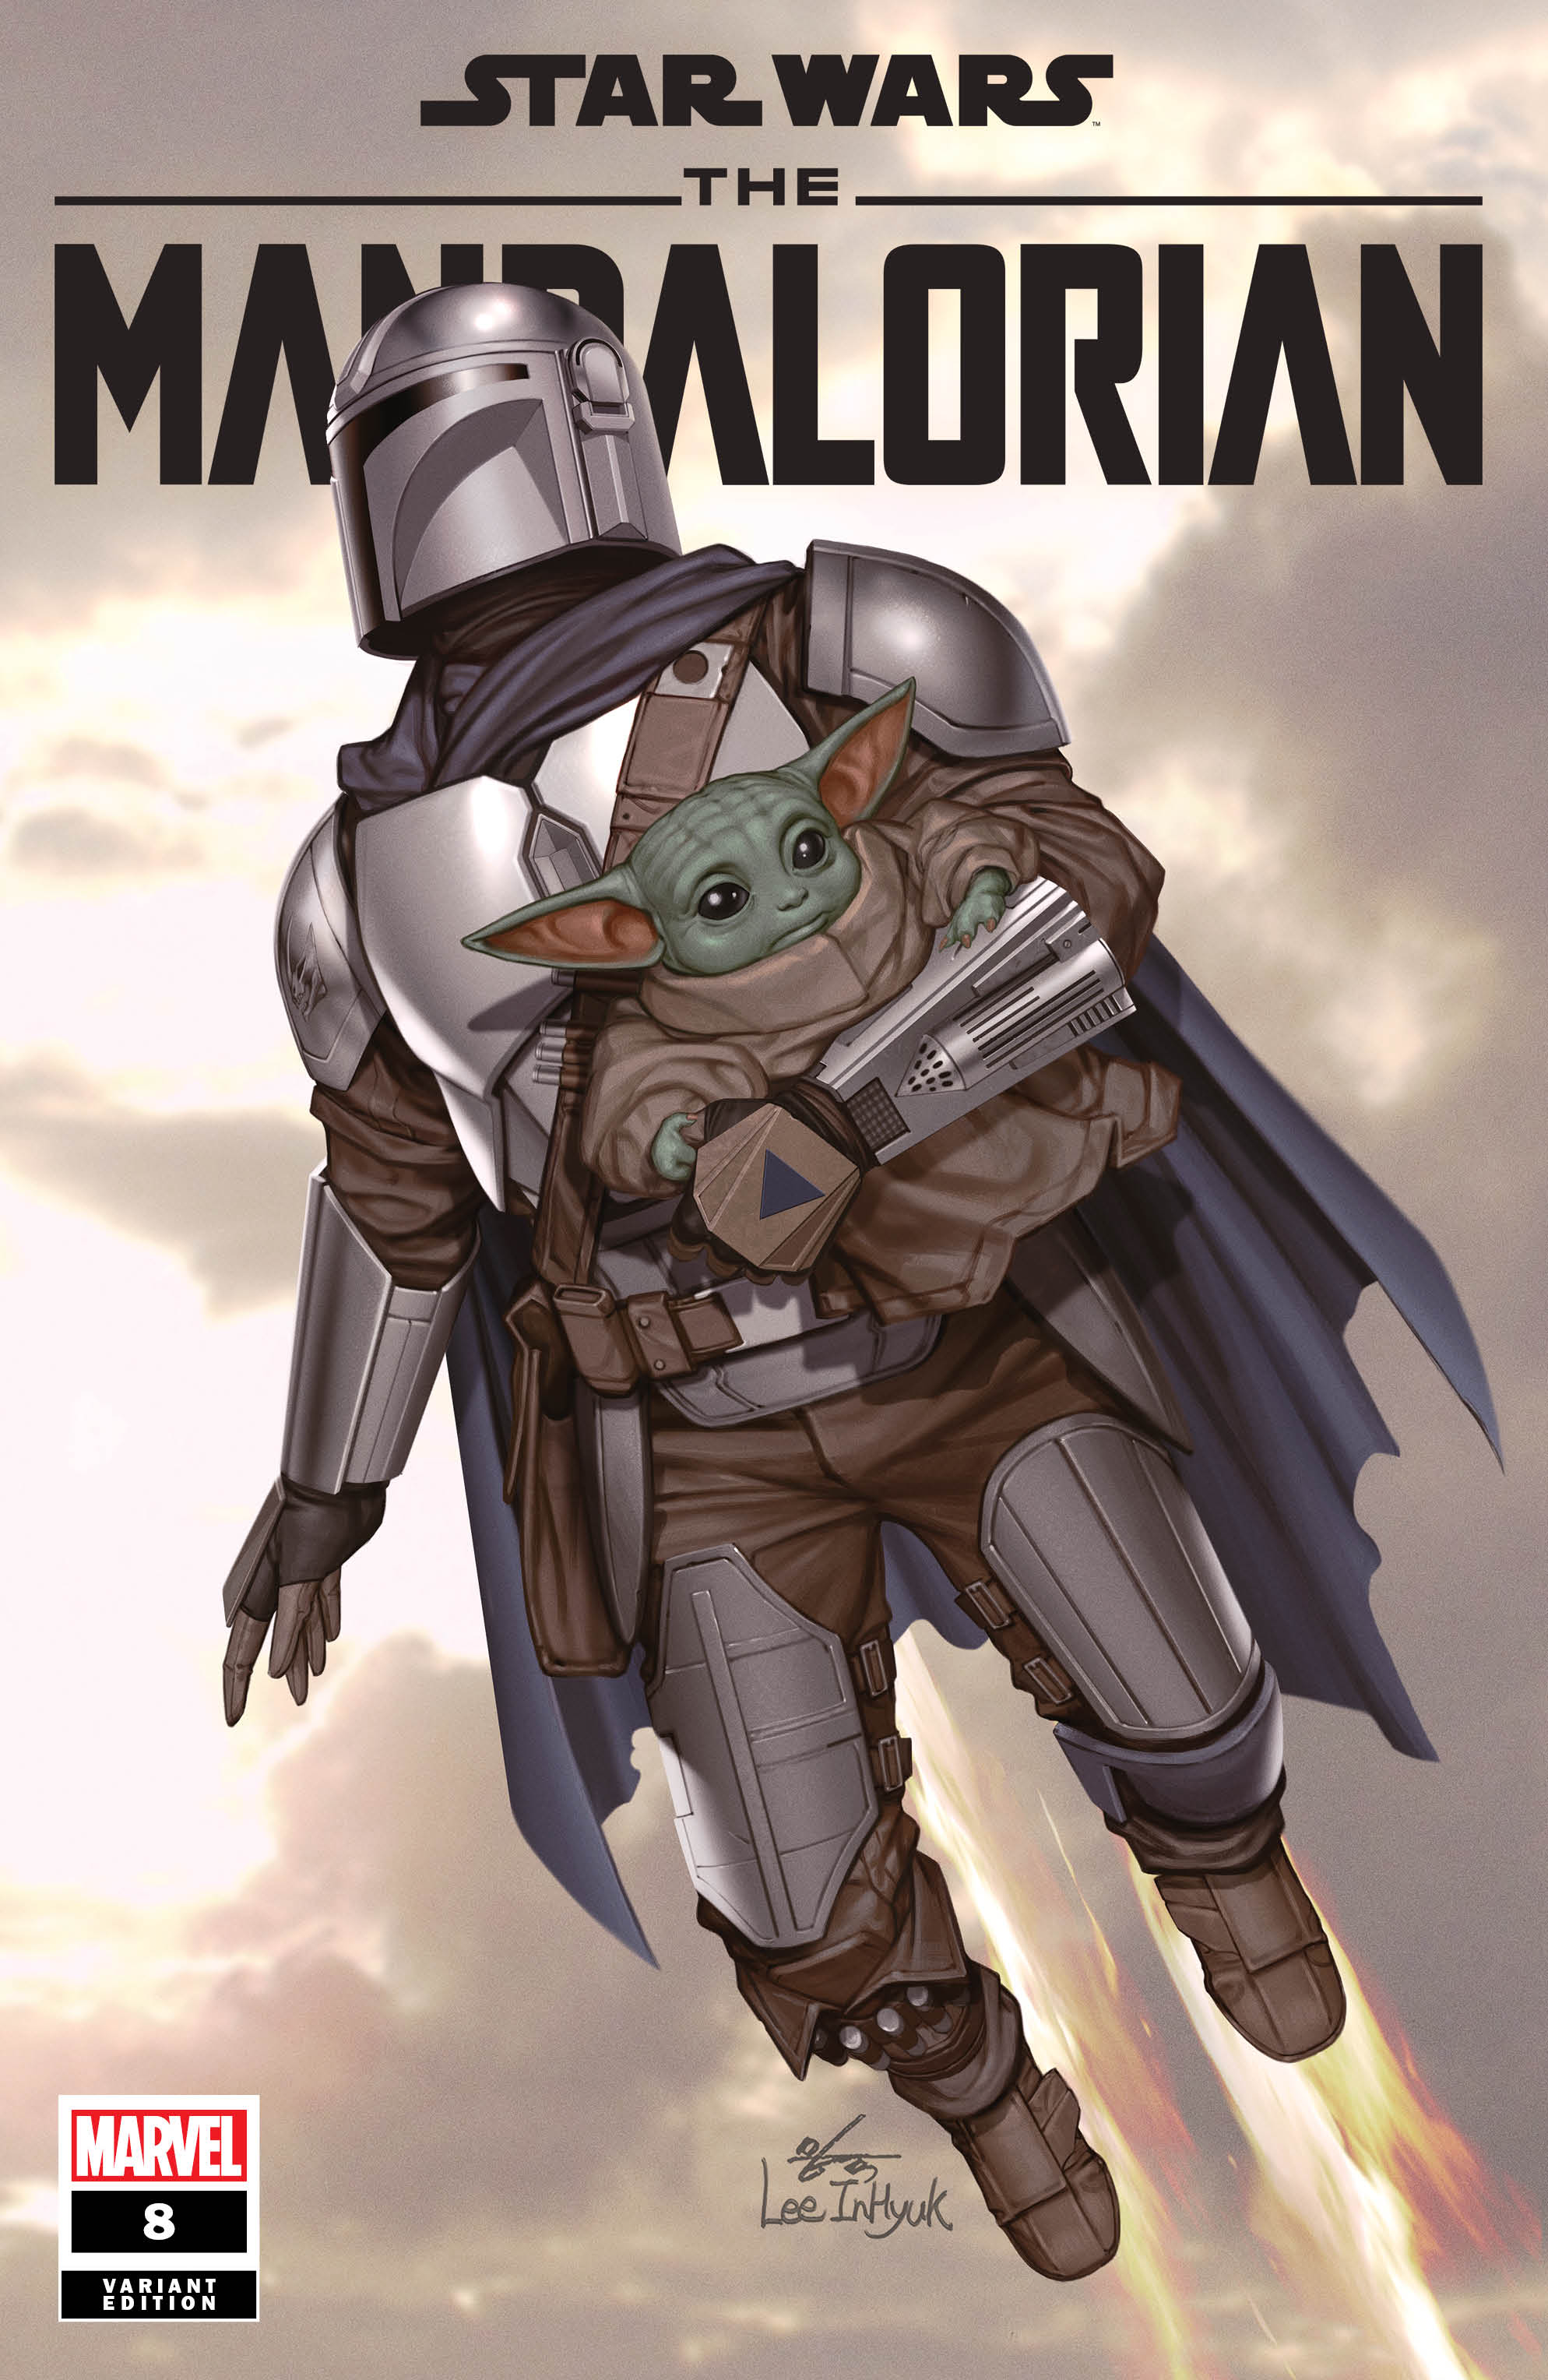 Marvel's Star Wars: The Mandalorian – Season 2 #8 — Exclusive Preview